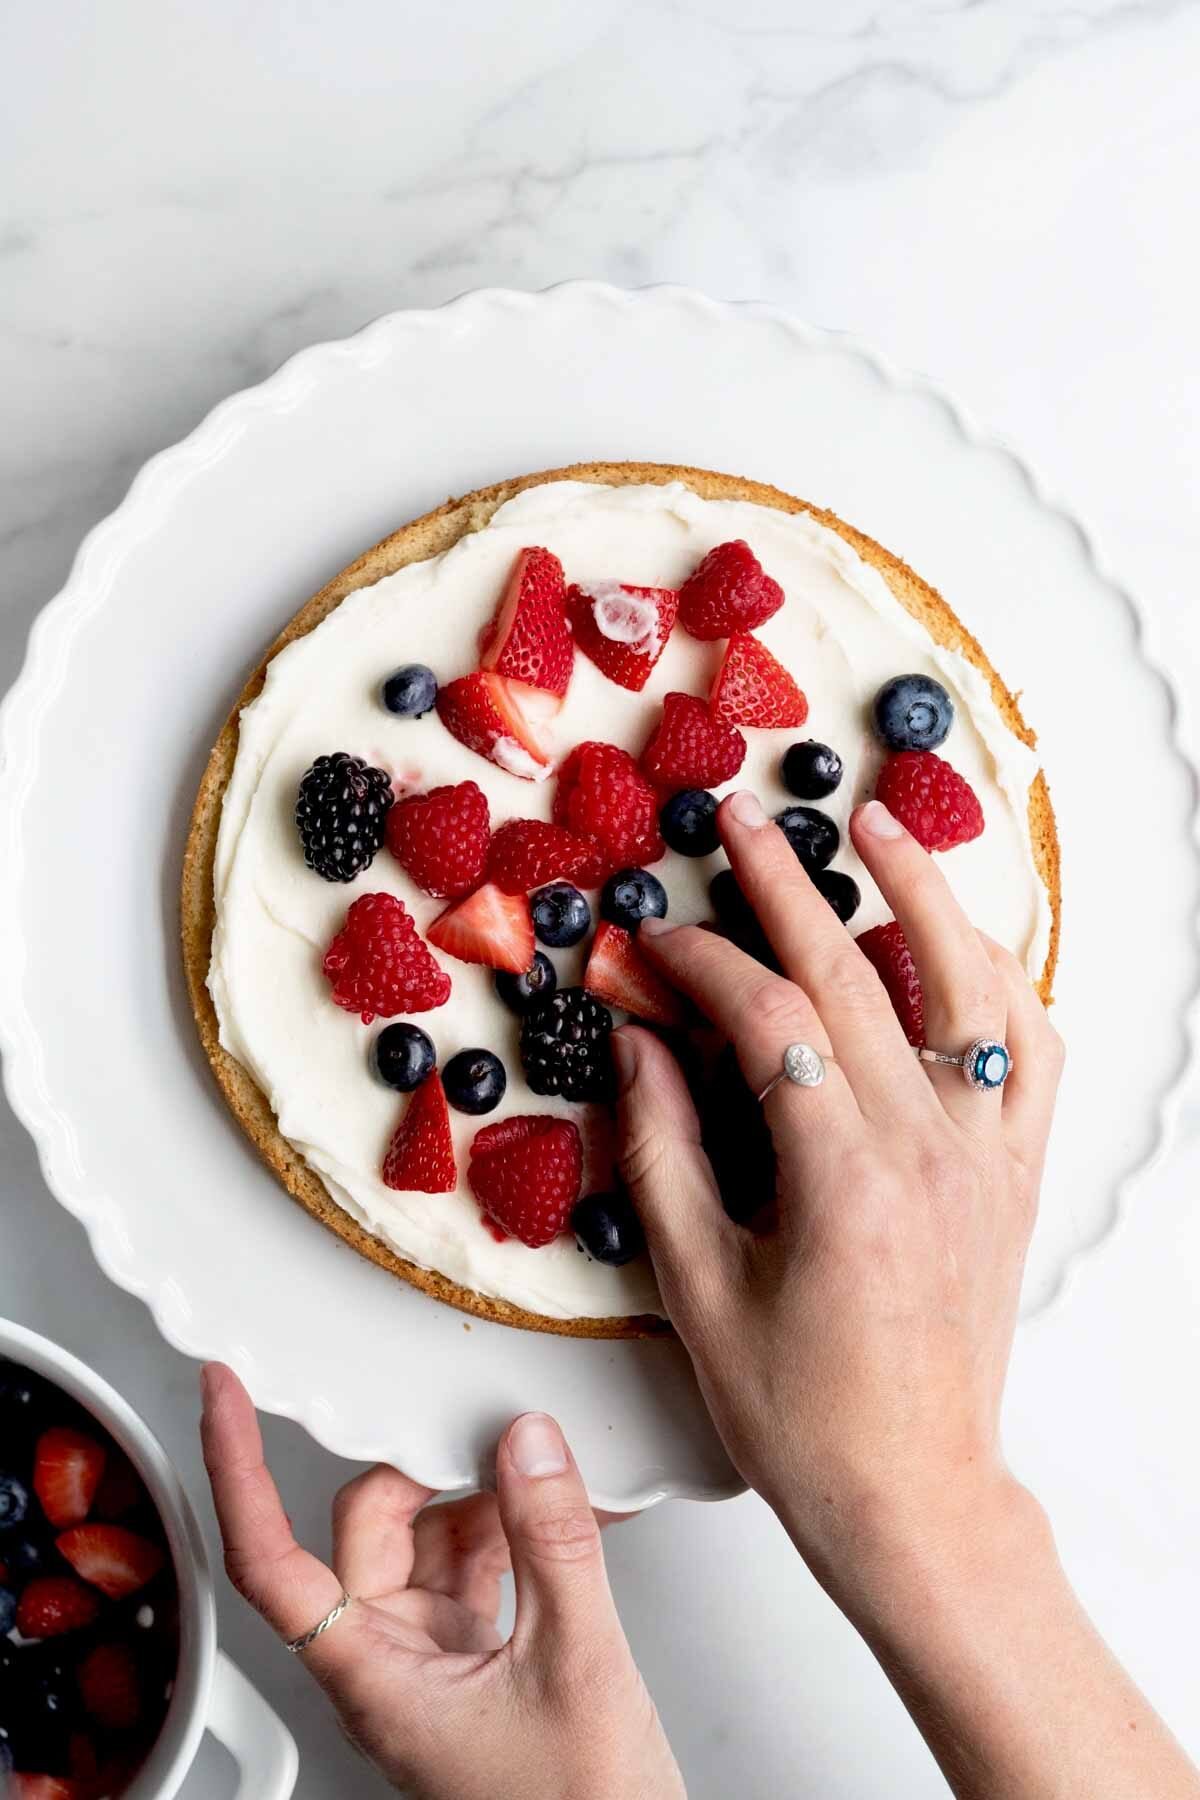 A hand delicately places the last strawberry atop the vanilla frosted cake.